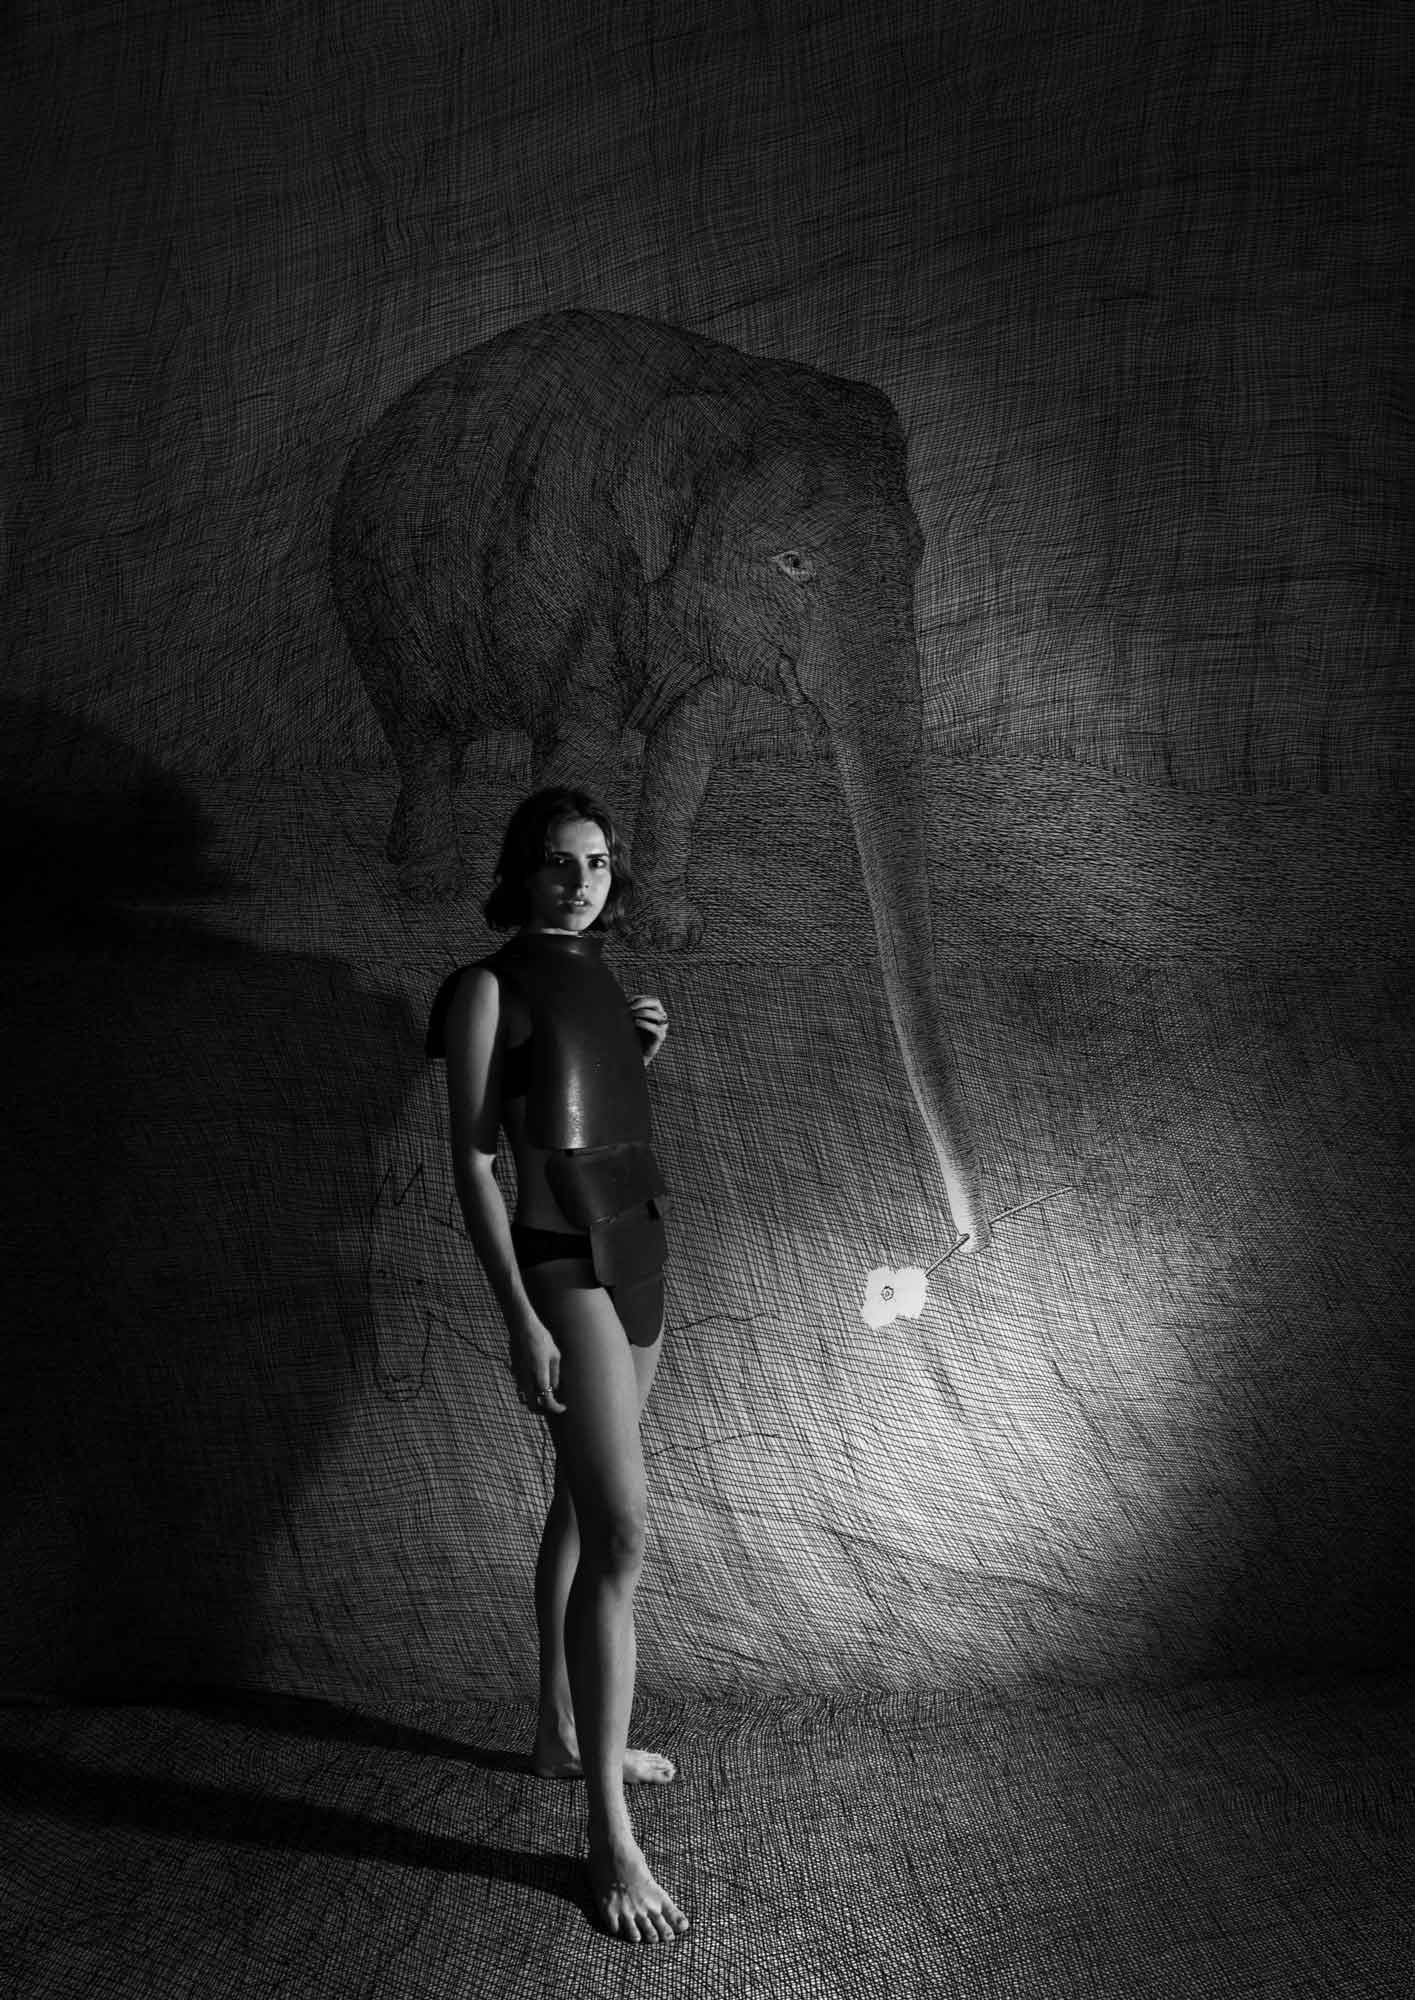 A woman in armor-like attire stands beside a textured wall with a large etched elephant.